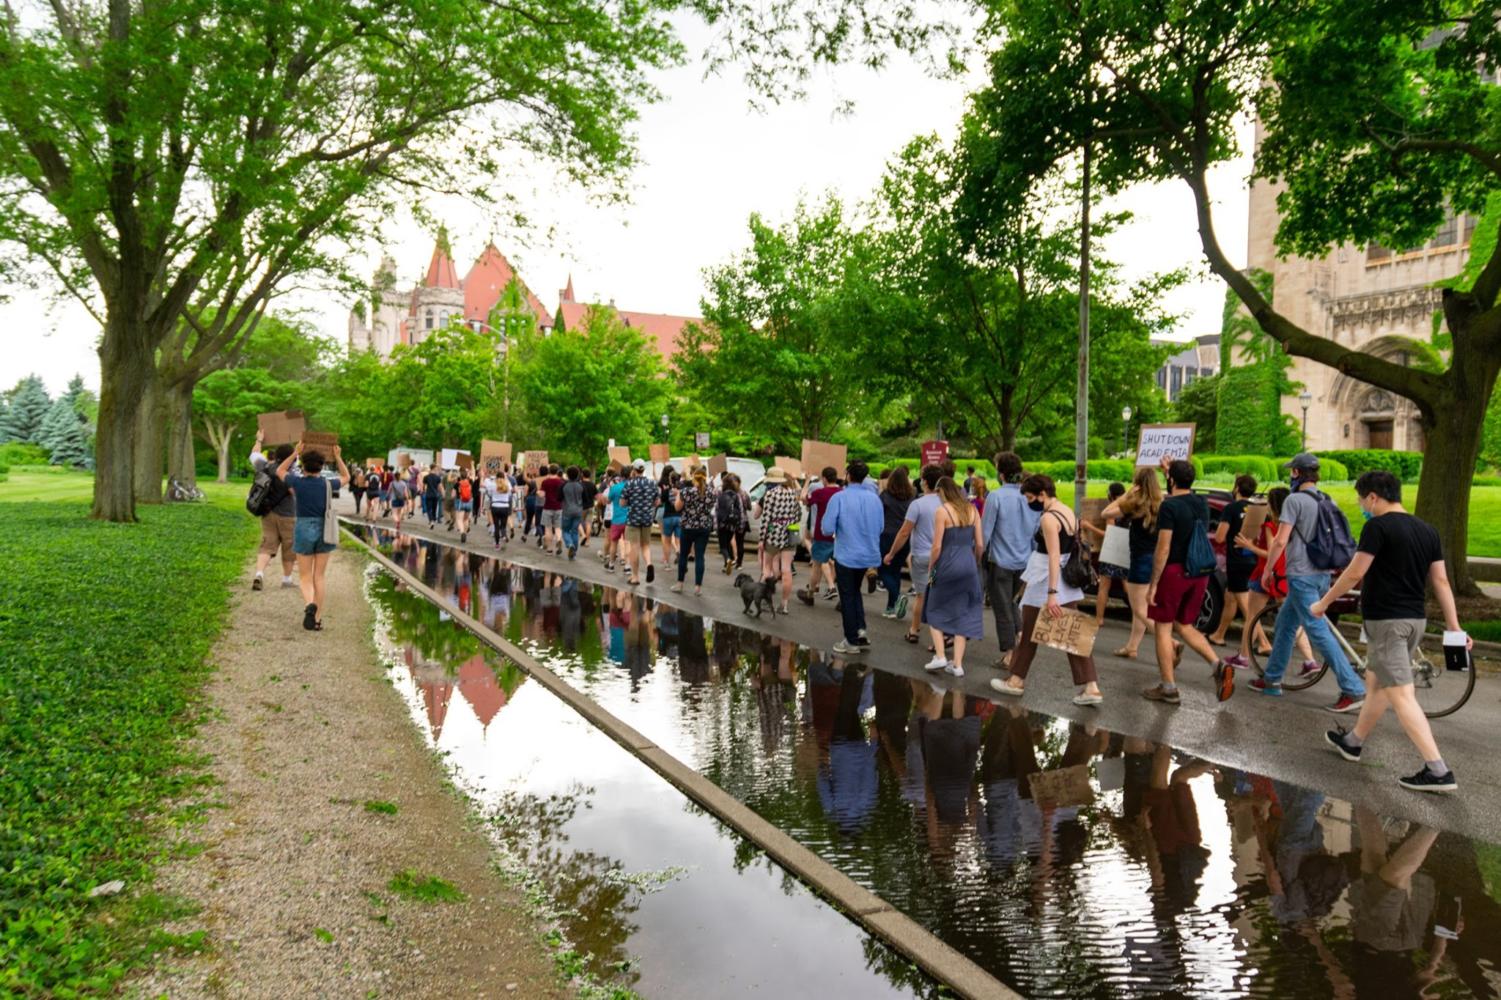 Protesters marched near the Midway during the #Strike4BlackLives March led by STEM departments at UChicago on June 10, 2020.